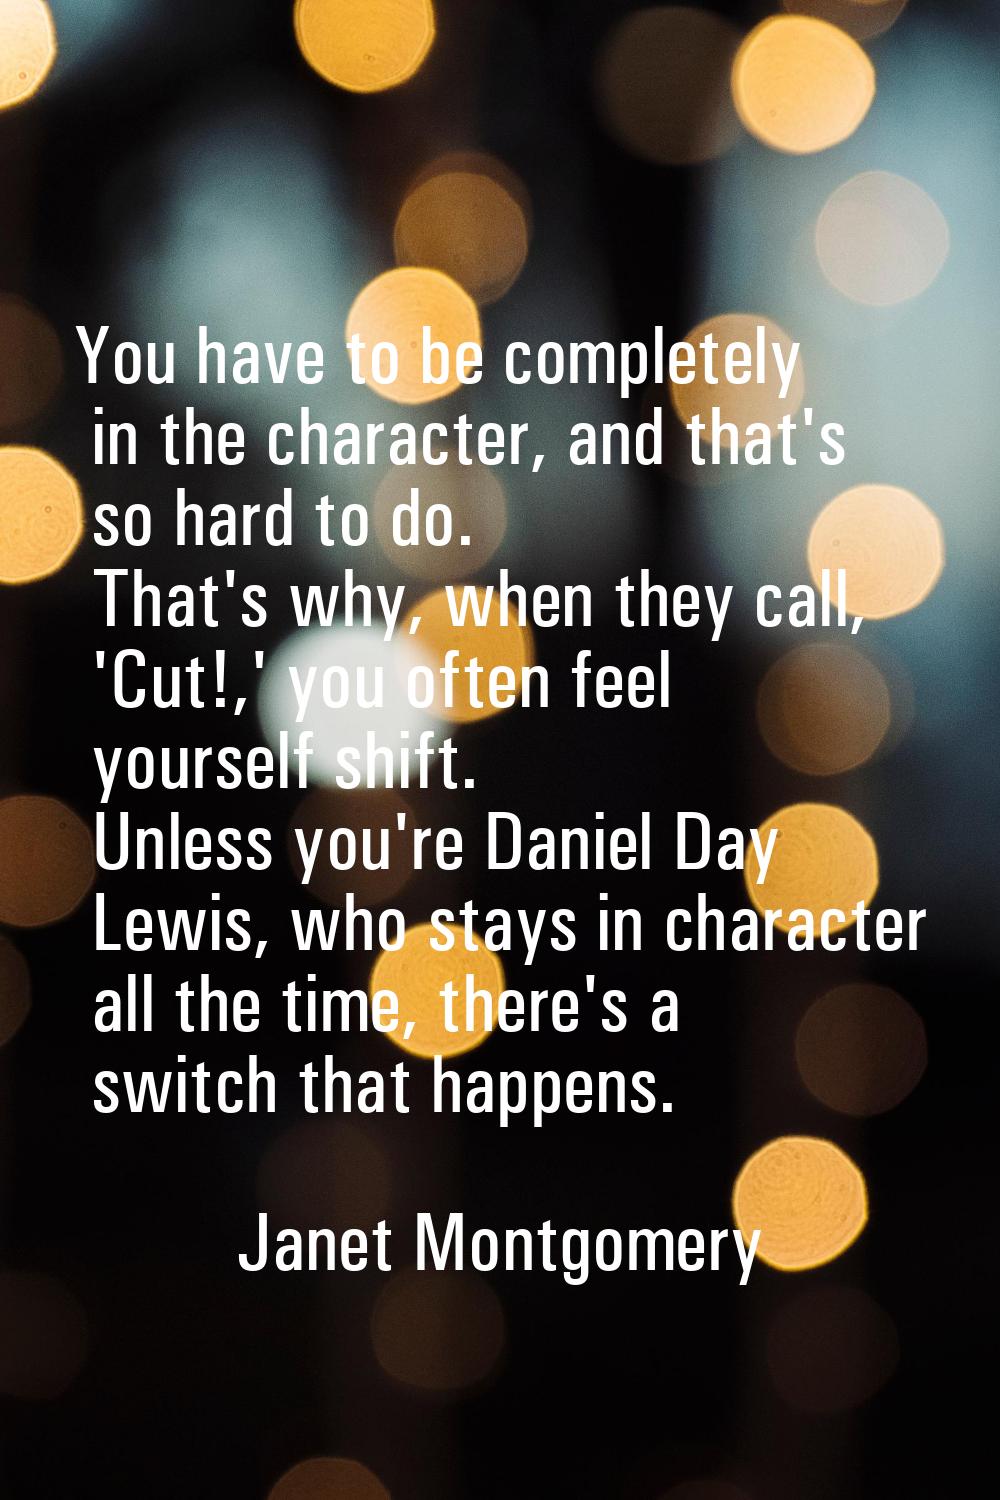 You have to be completely in the character, and that's so hard to do. That's why, when they call, '